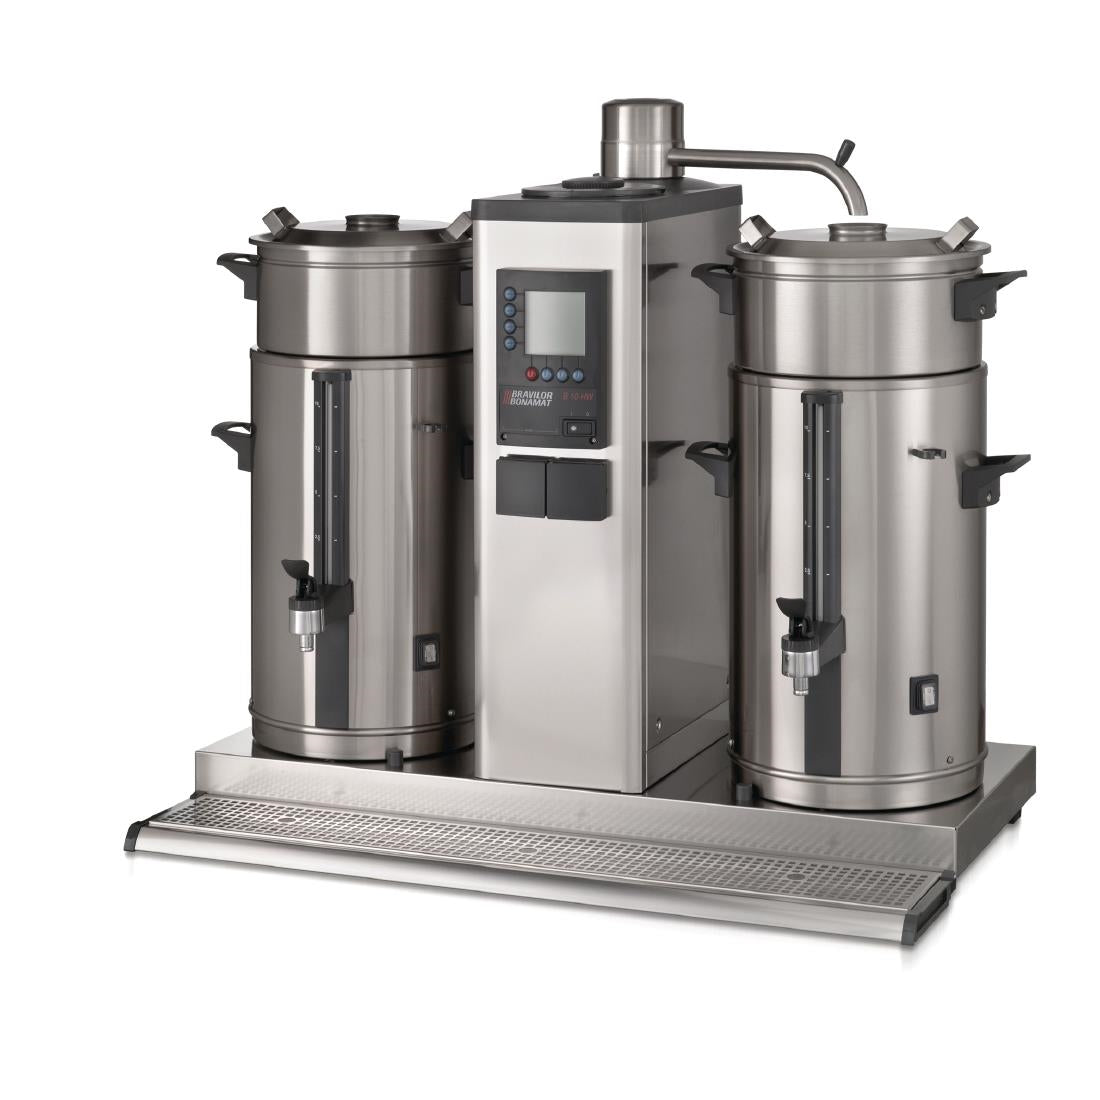 DC684 Bravilor B40 Bulk Coffee Brewer with 2x40Ltr Coffee Urns 3 Phase JD Catering Equipment Solutions Ltd